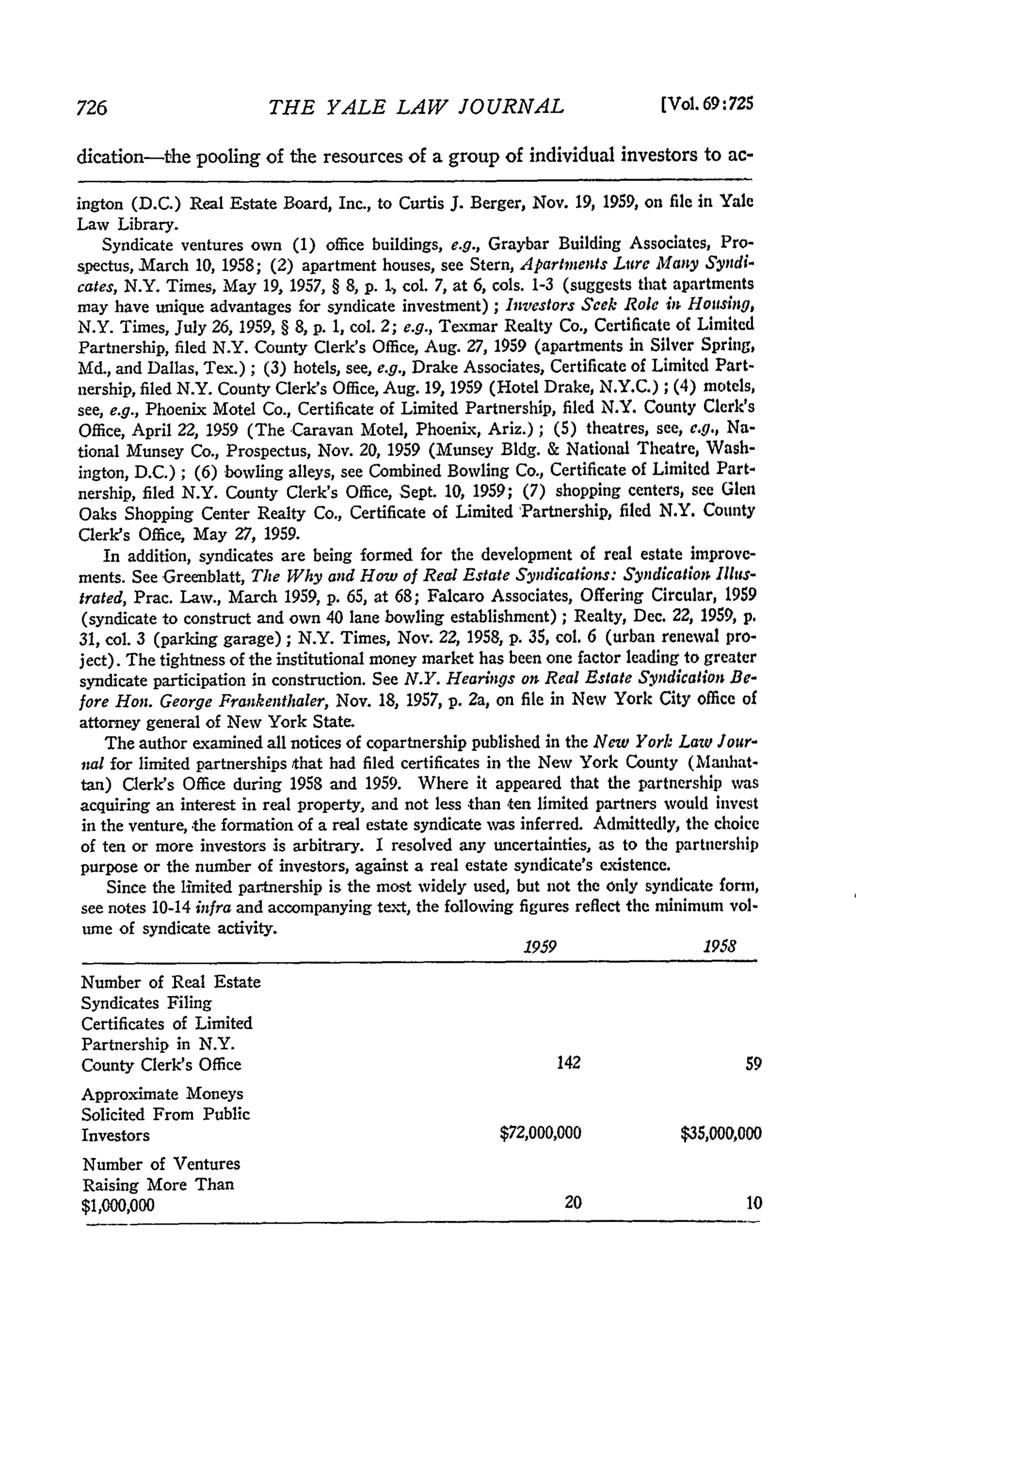 THE YALE LAW JOURNAL [Vol. 69: 725 dication-the pooling of the resources of a group of individual investors to acington (D.C.) Real Estate Board, Inc., to Curtis J. Berger, Nov.